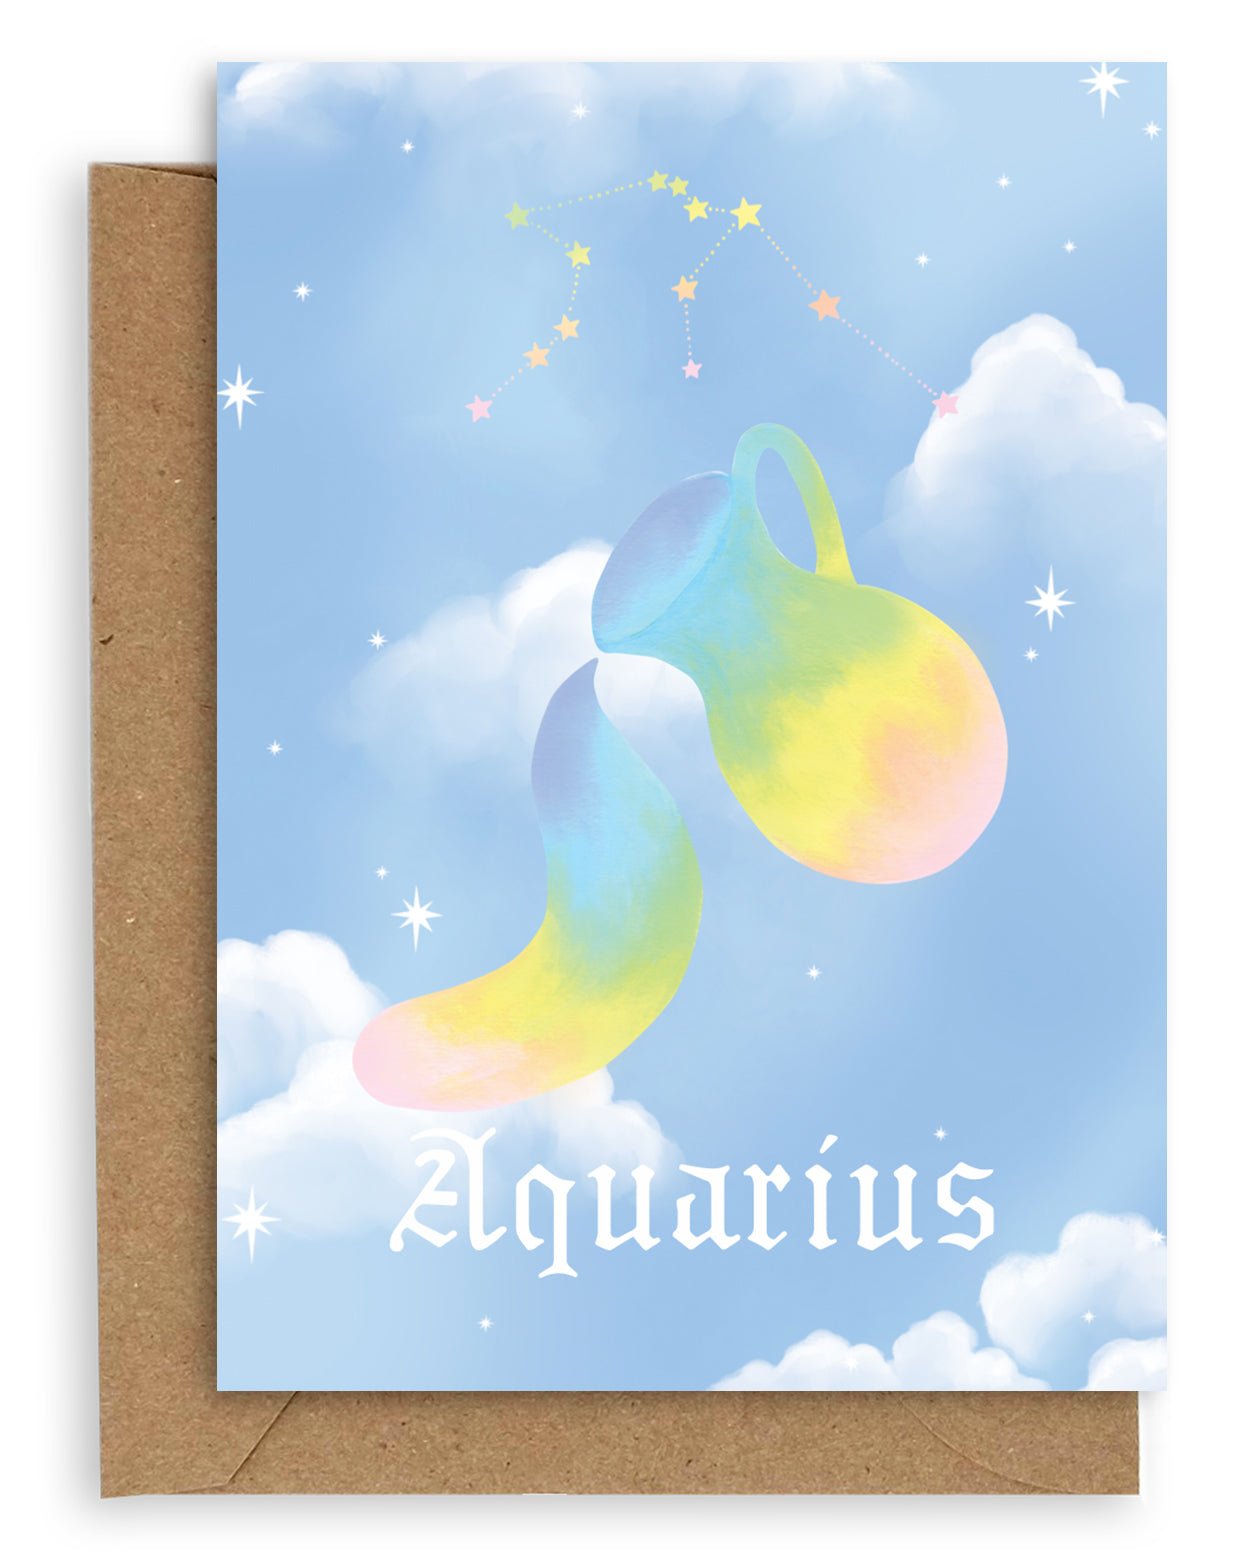 Aquarius Horoscope card with a kraft envelope. The horoscope symbol is painted in rainbow pastel on a blue background with white clouds. 